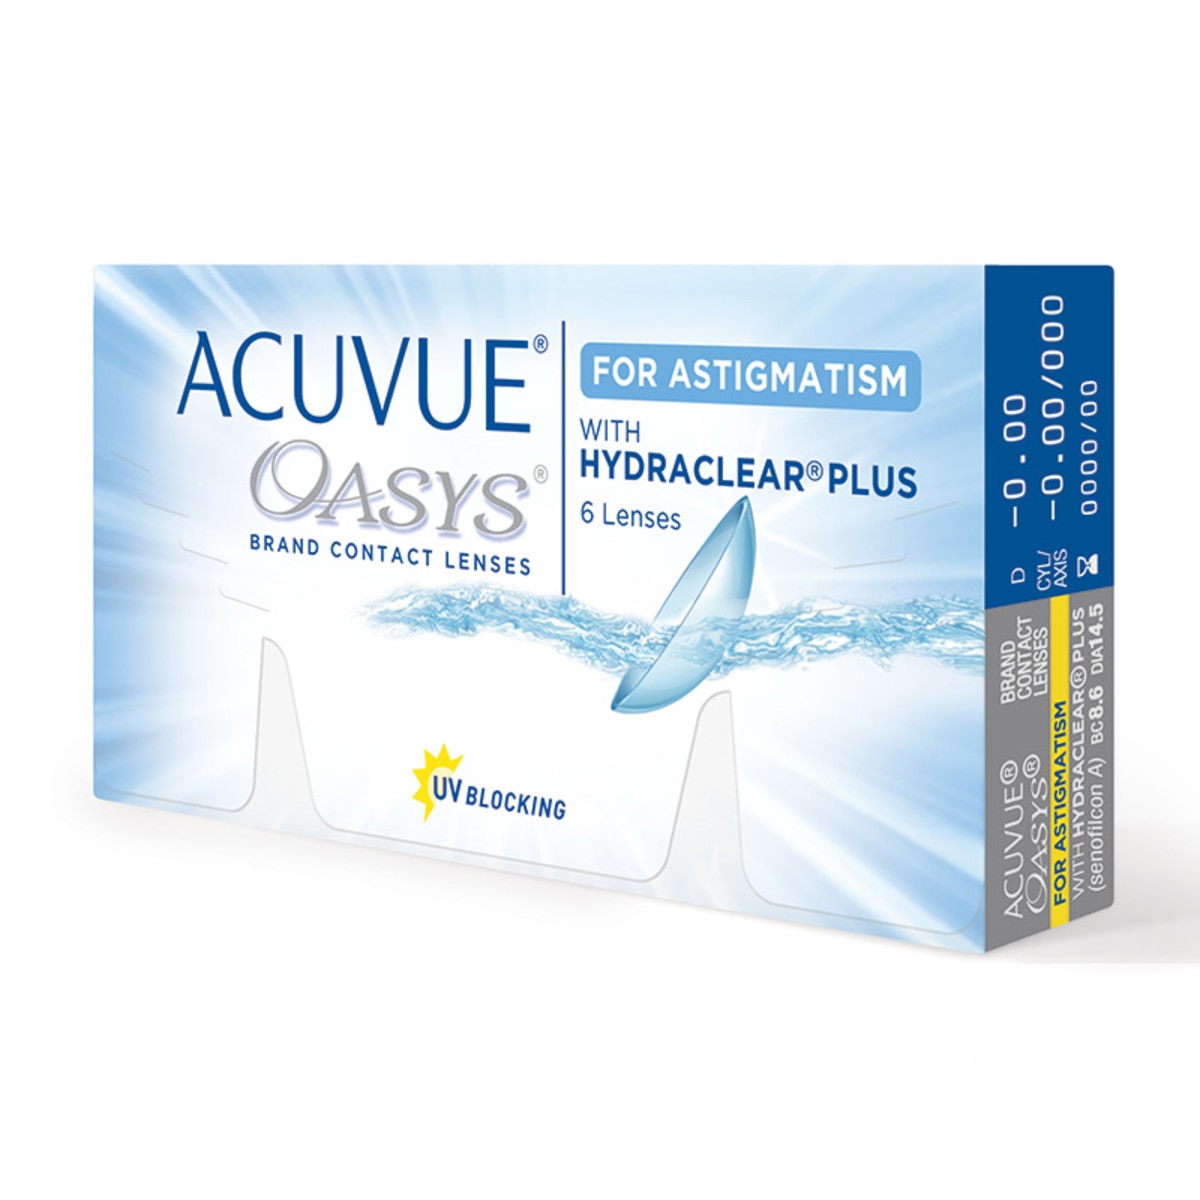 ACUVUE OASYS® con HYDRACLEAR Plus® para Astigmatismo (D 0, Cyl/Axis -2.25/80)